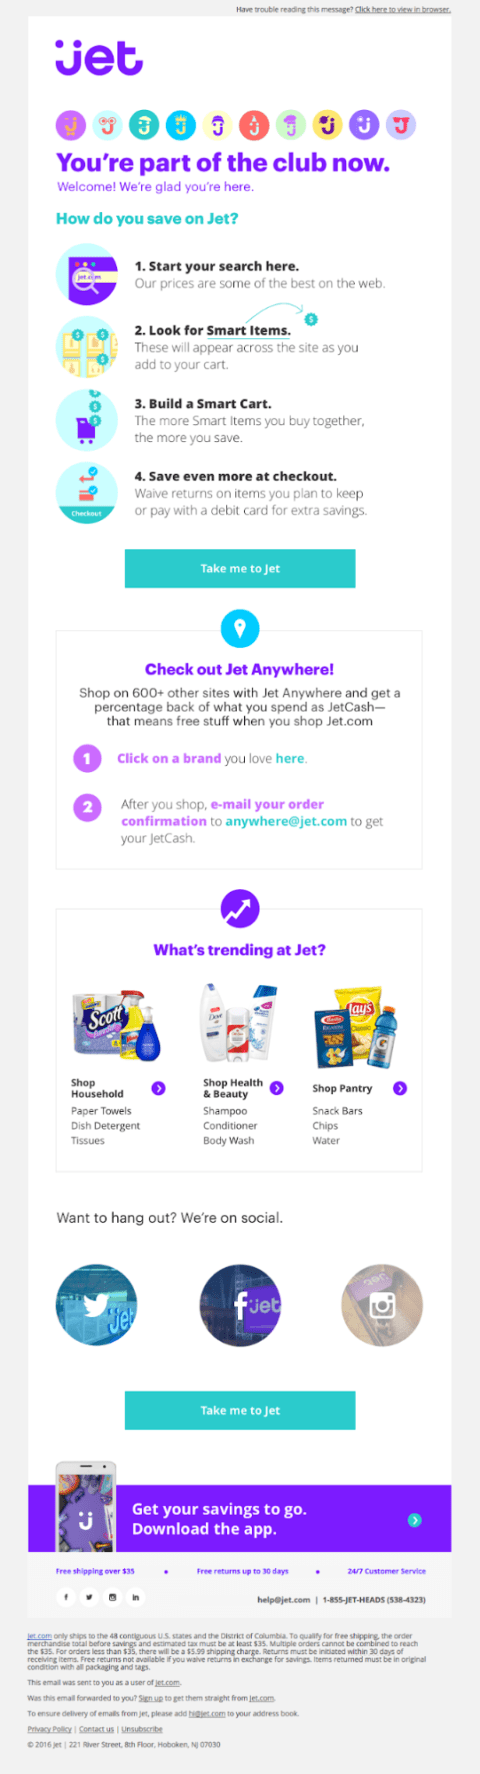 33 Incredible User Onboarding Emails | Wyzowl